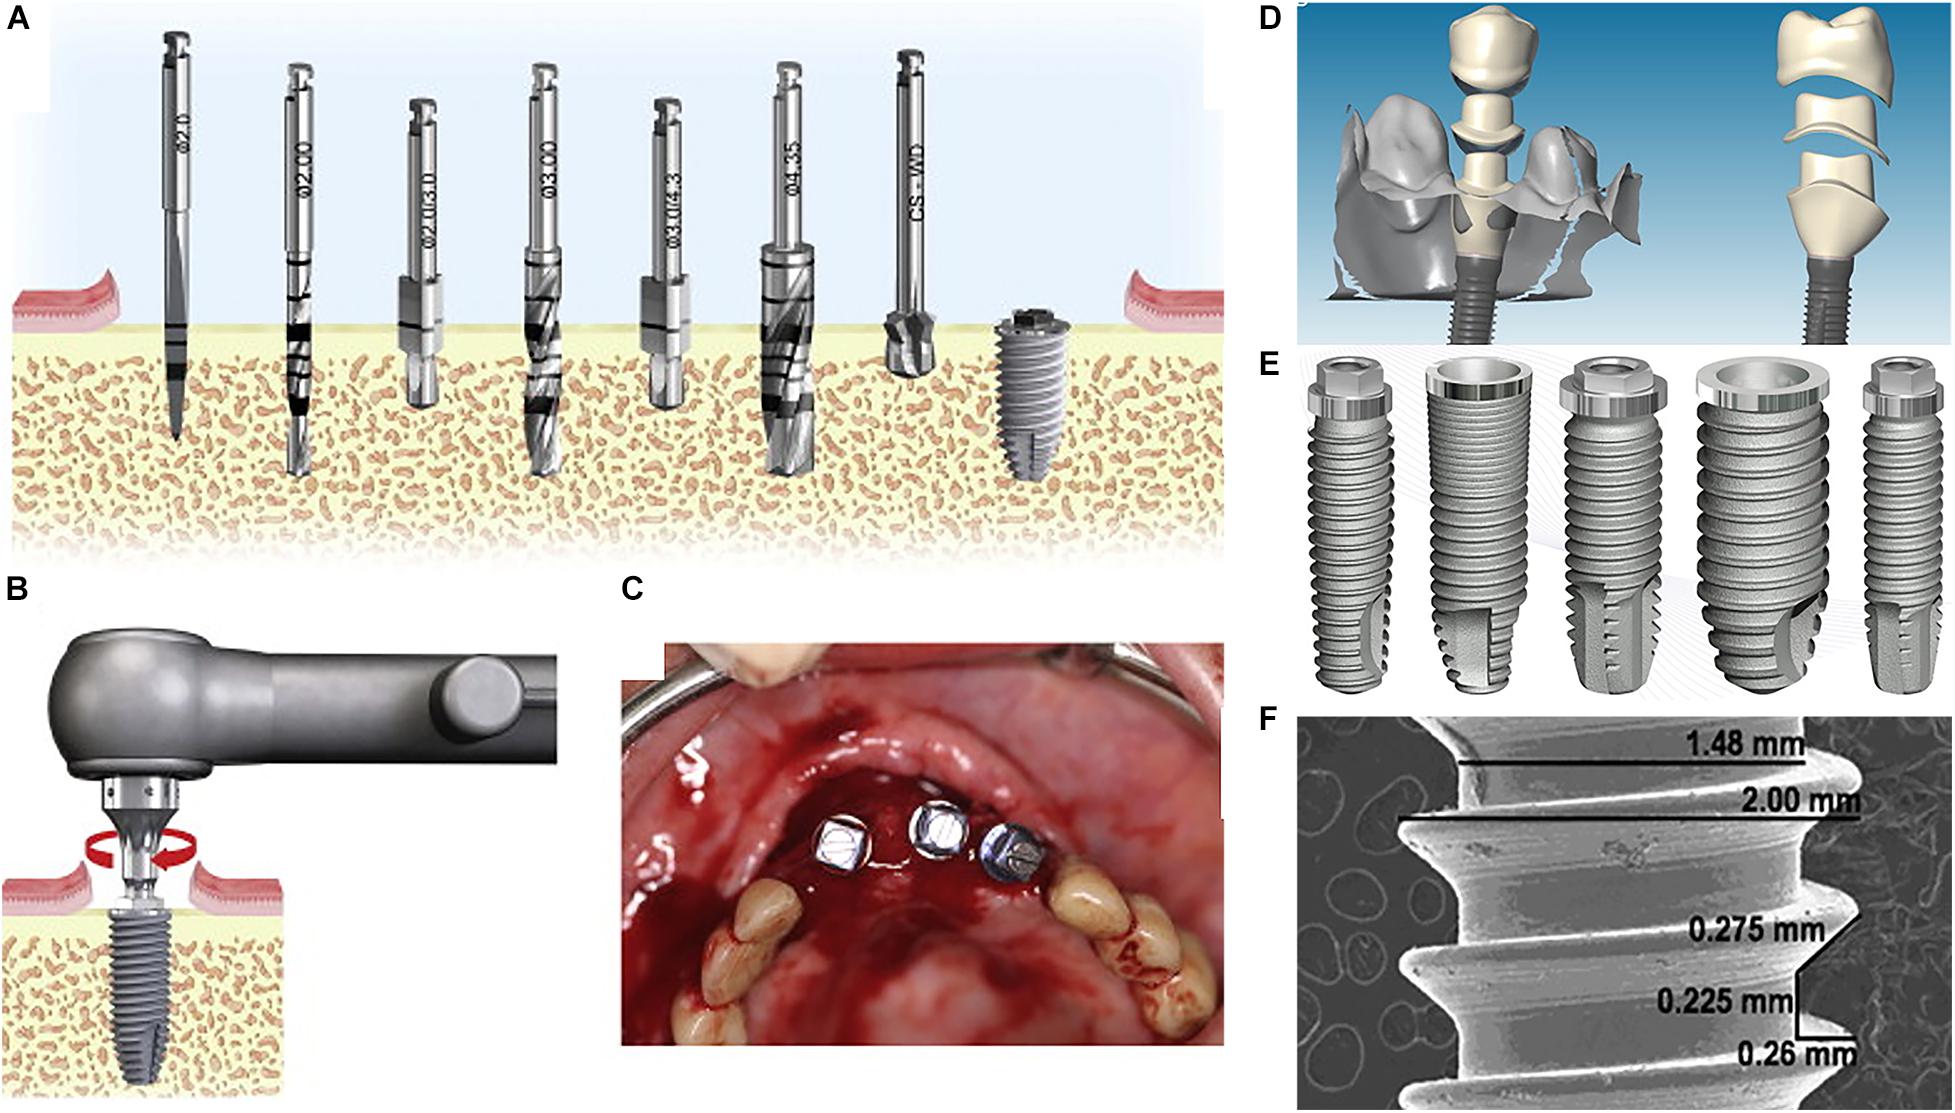 Frontiers | A Brief Review on the Evolution of Metallic Dental Implants:  History, Design, and Application